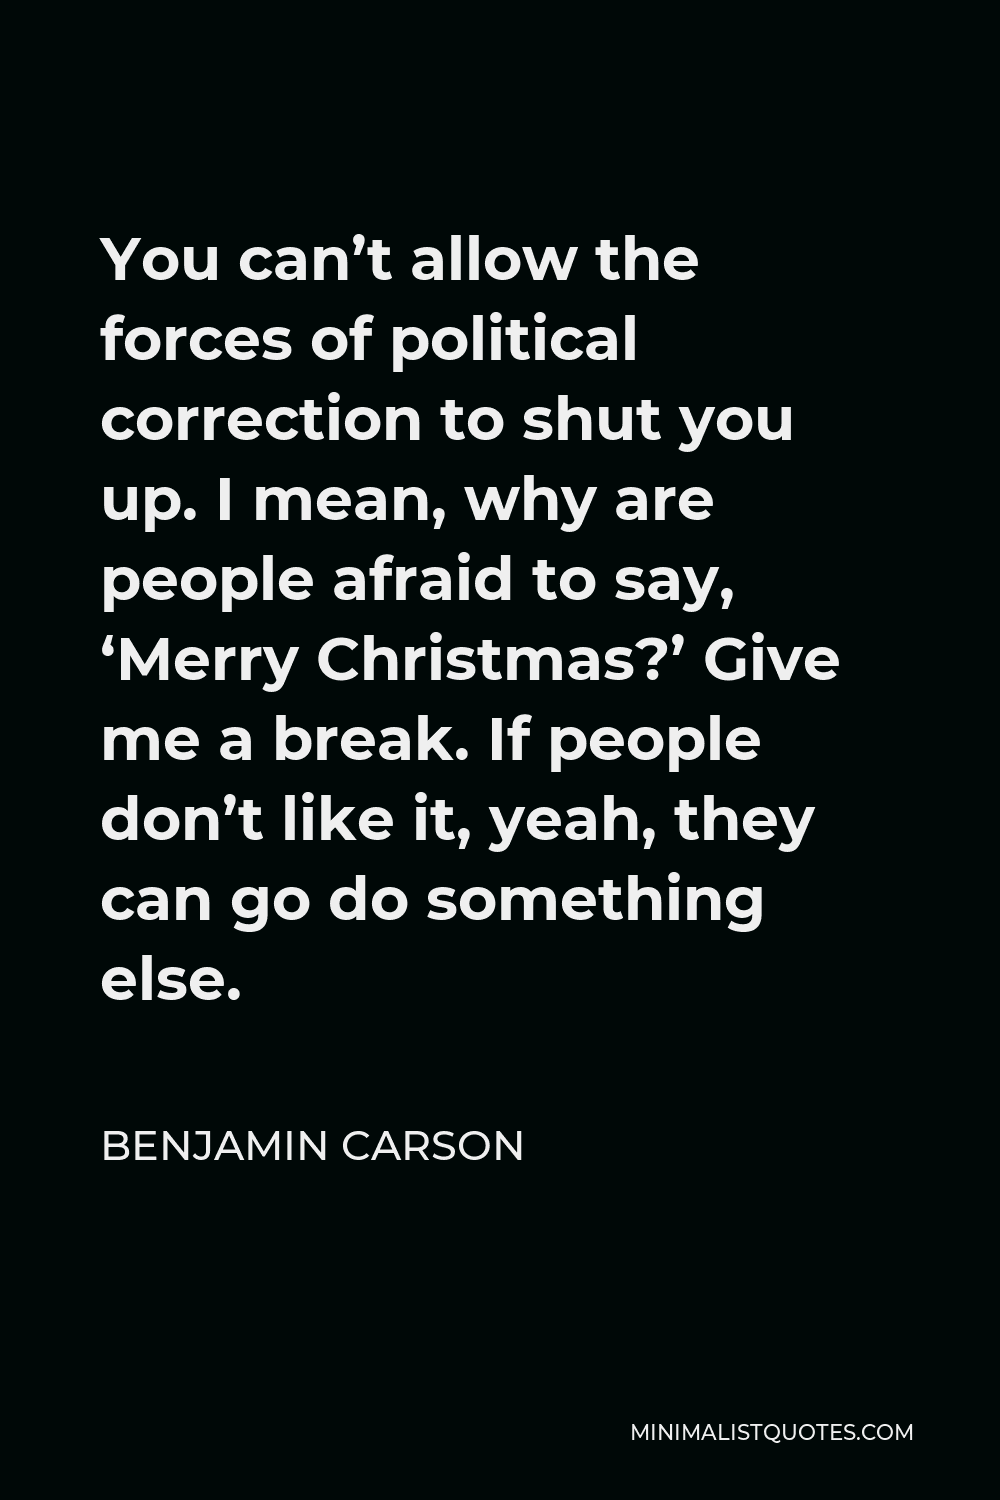 Benjamin Carson Quote - You can’t allow the forces of political correction to shut you up. I mean, why are people afraid to say, ‘Merry Christmas?’ Give me a break. If people don’t like it, yeah, they can go do something else.